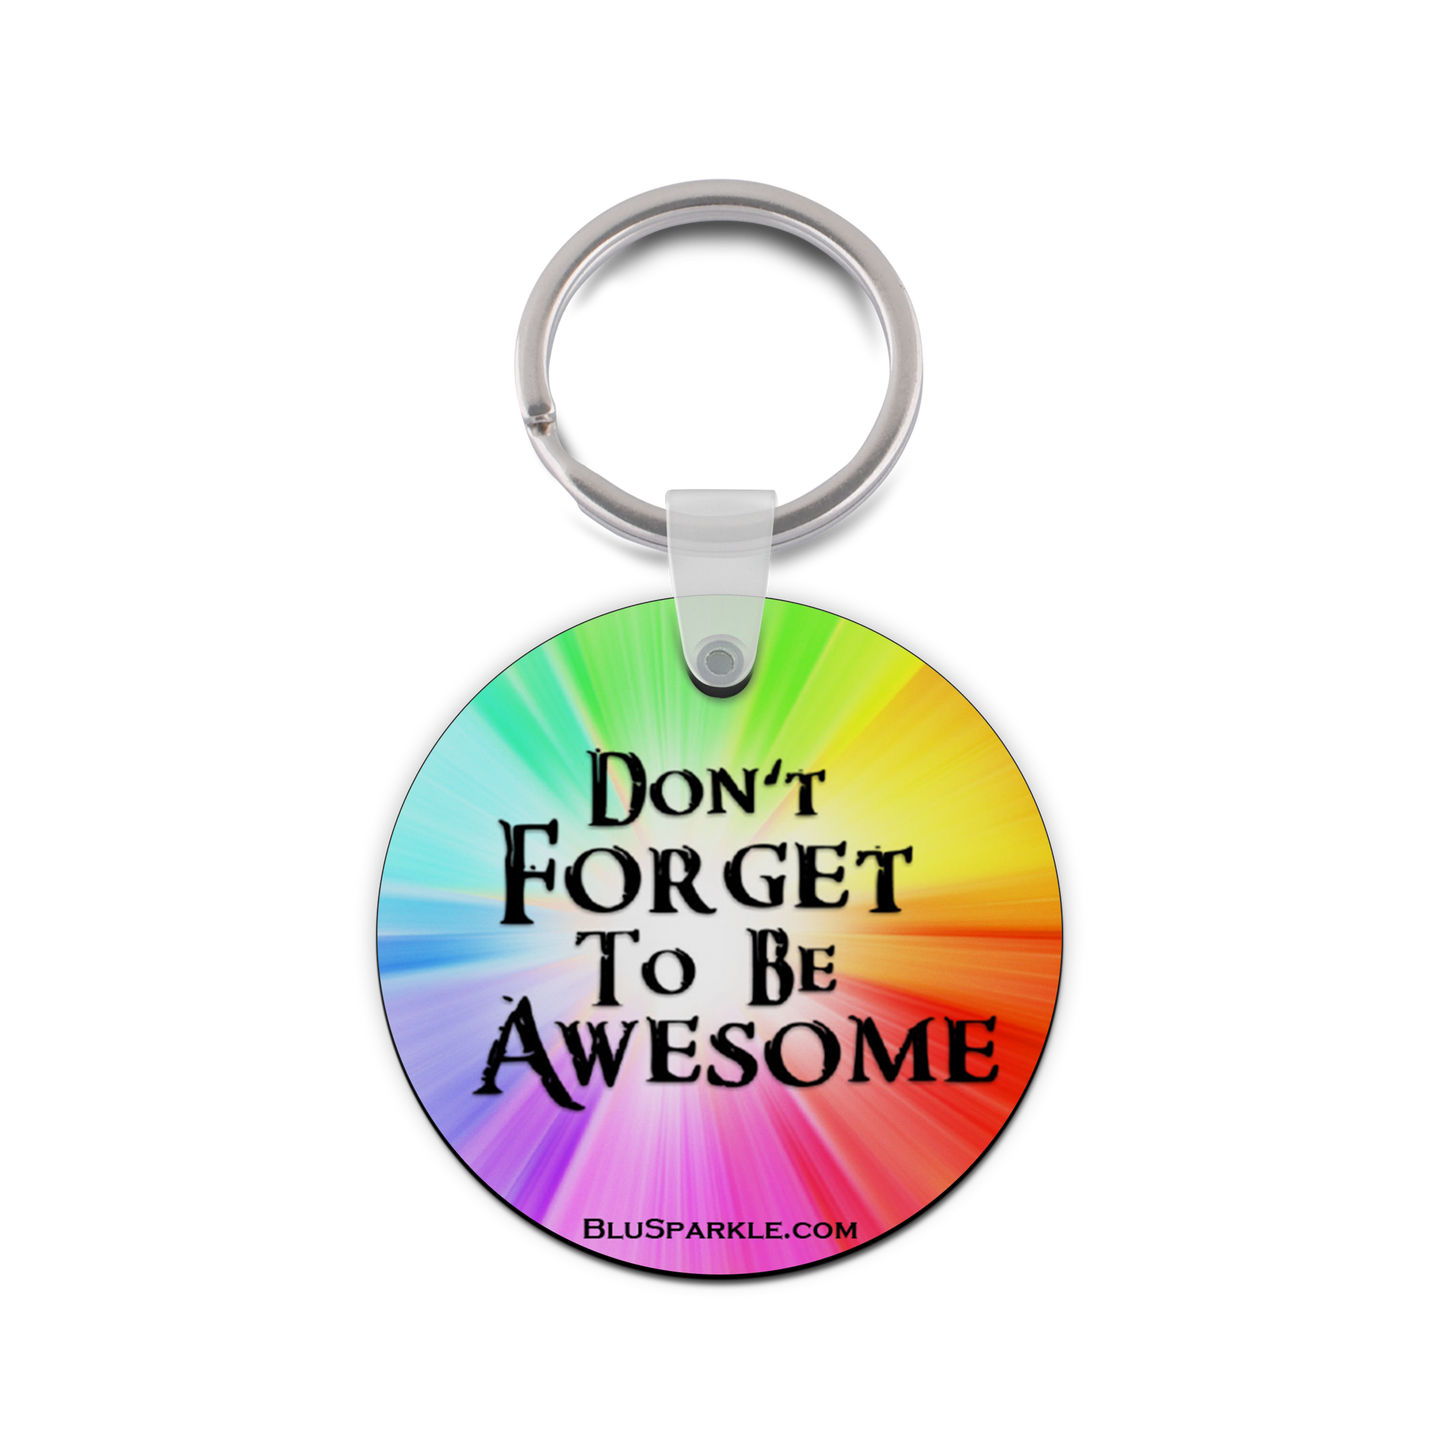 Don't Forget To Be Awesome - Double Sided Key Chain